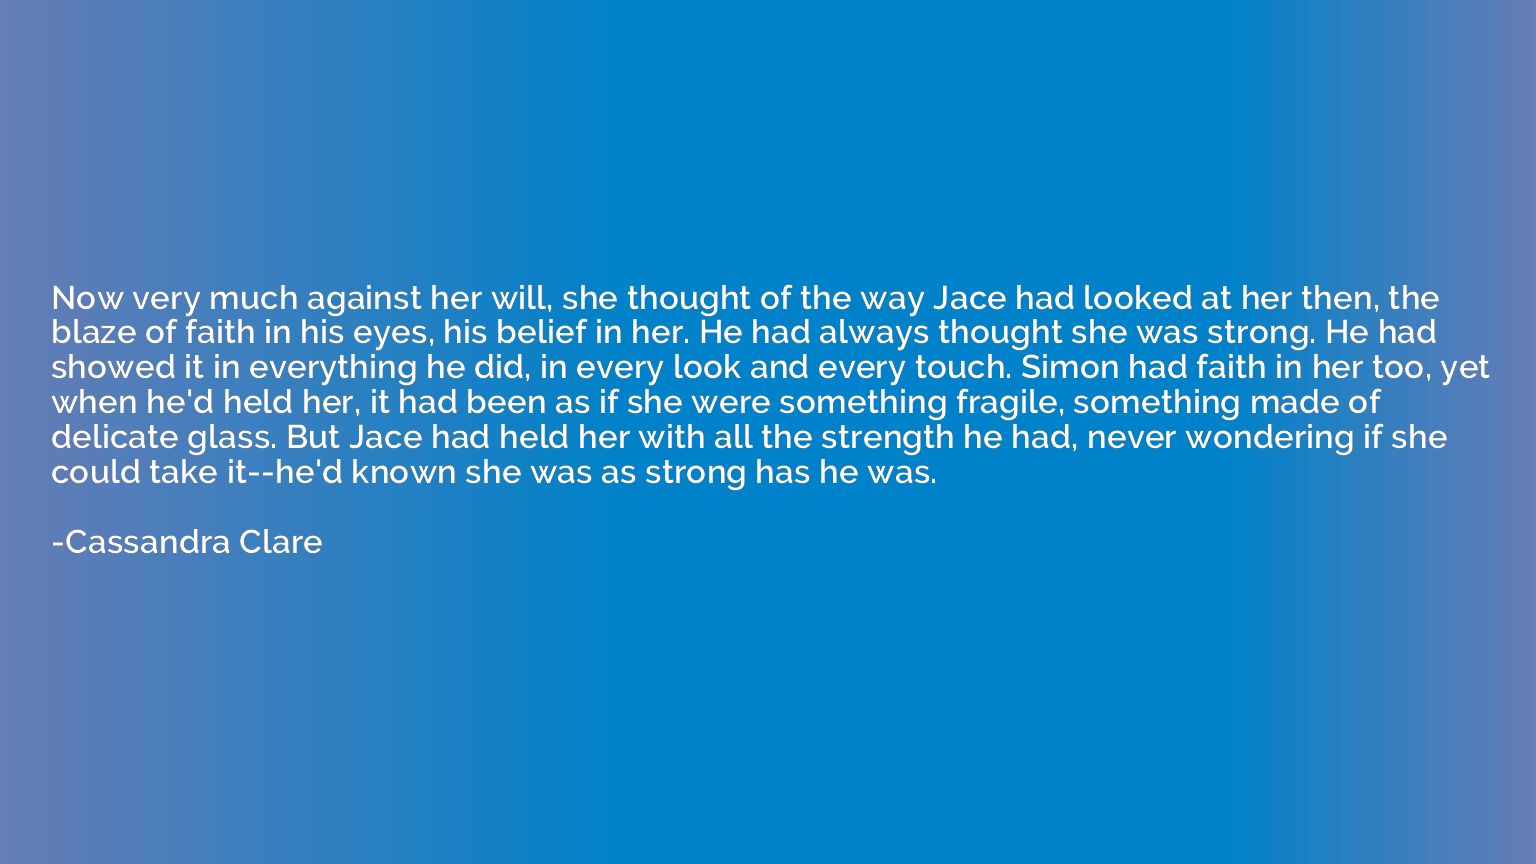 Now very much against her will, she thought of the way Jace 